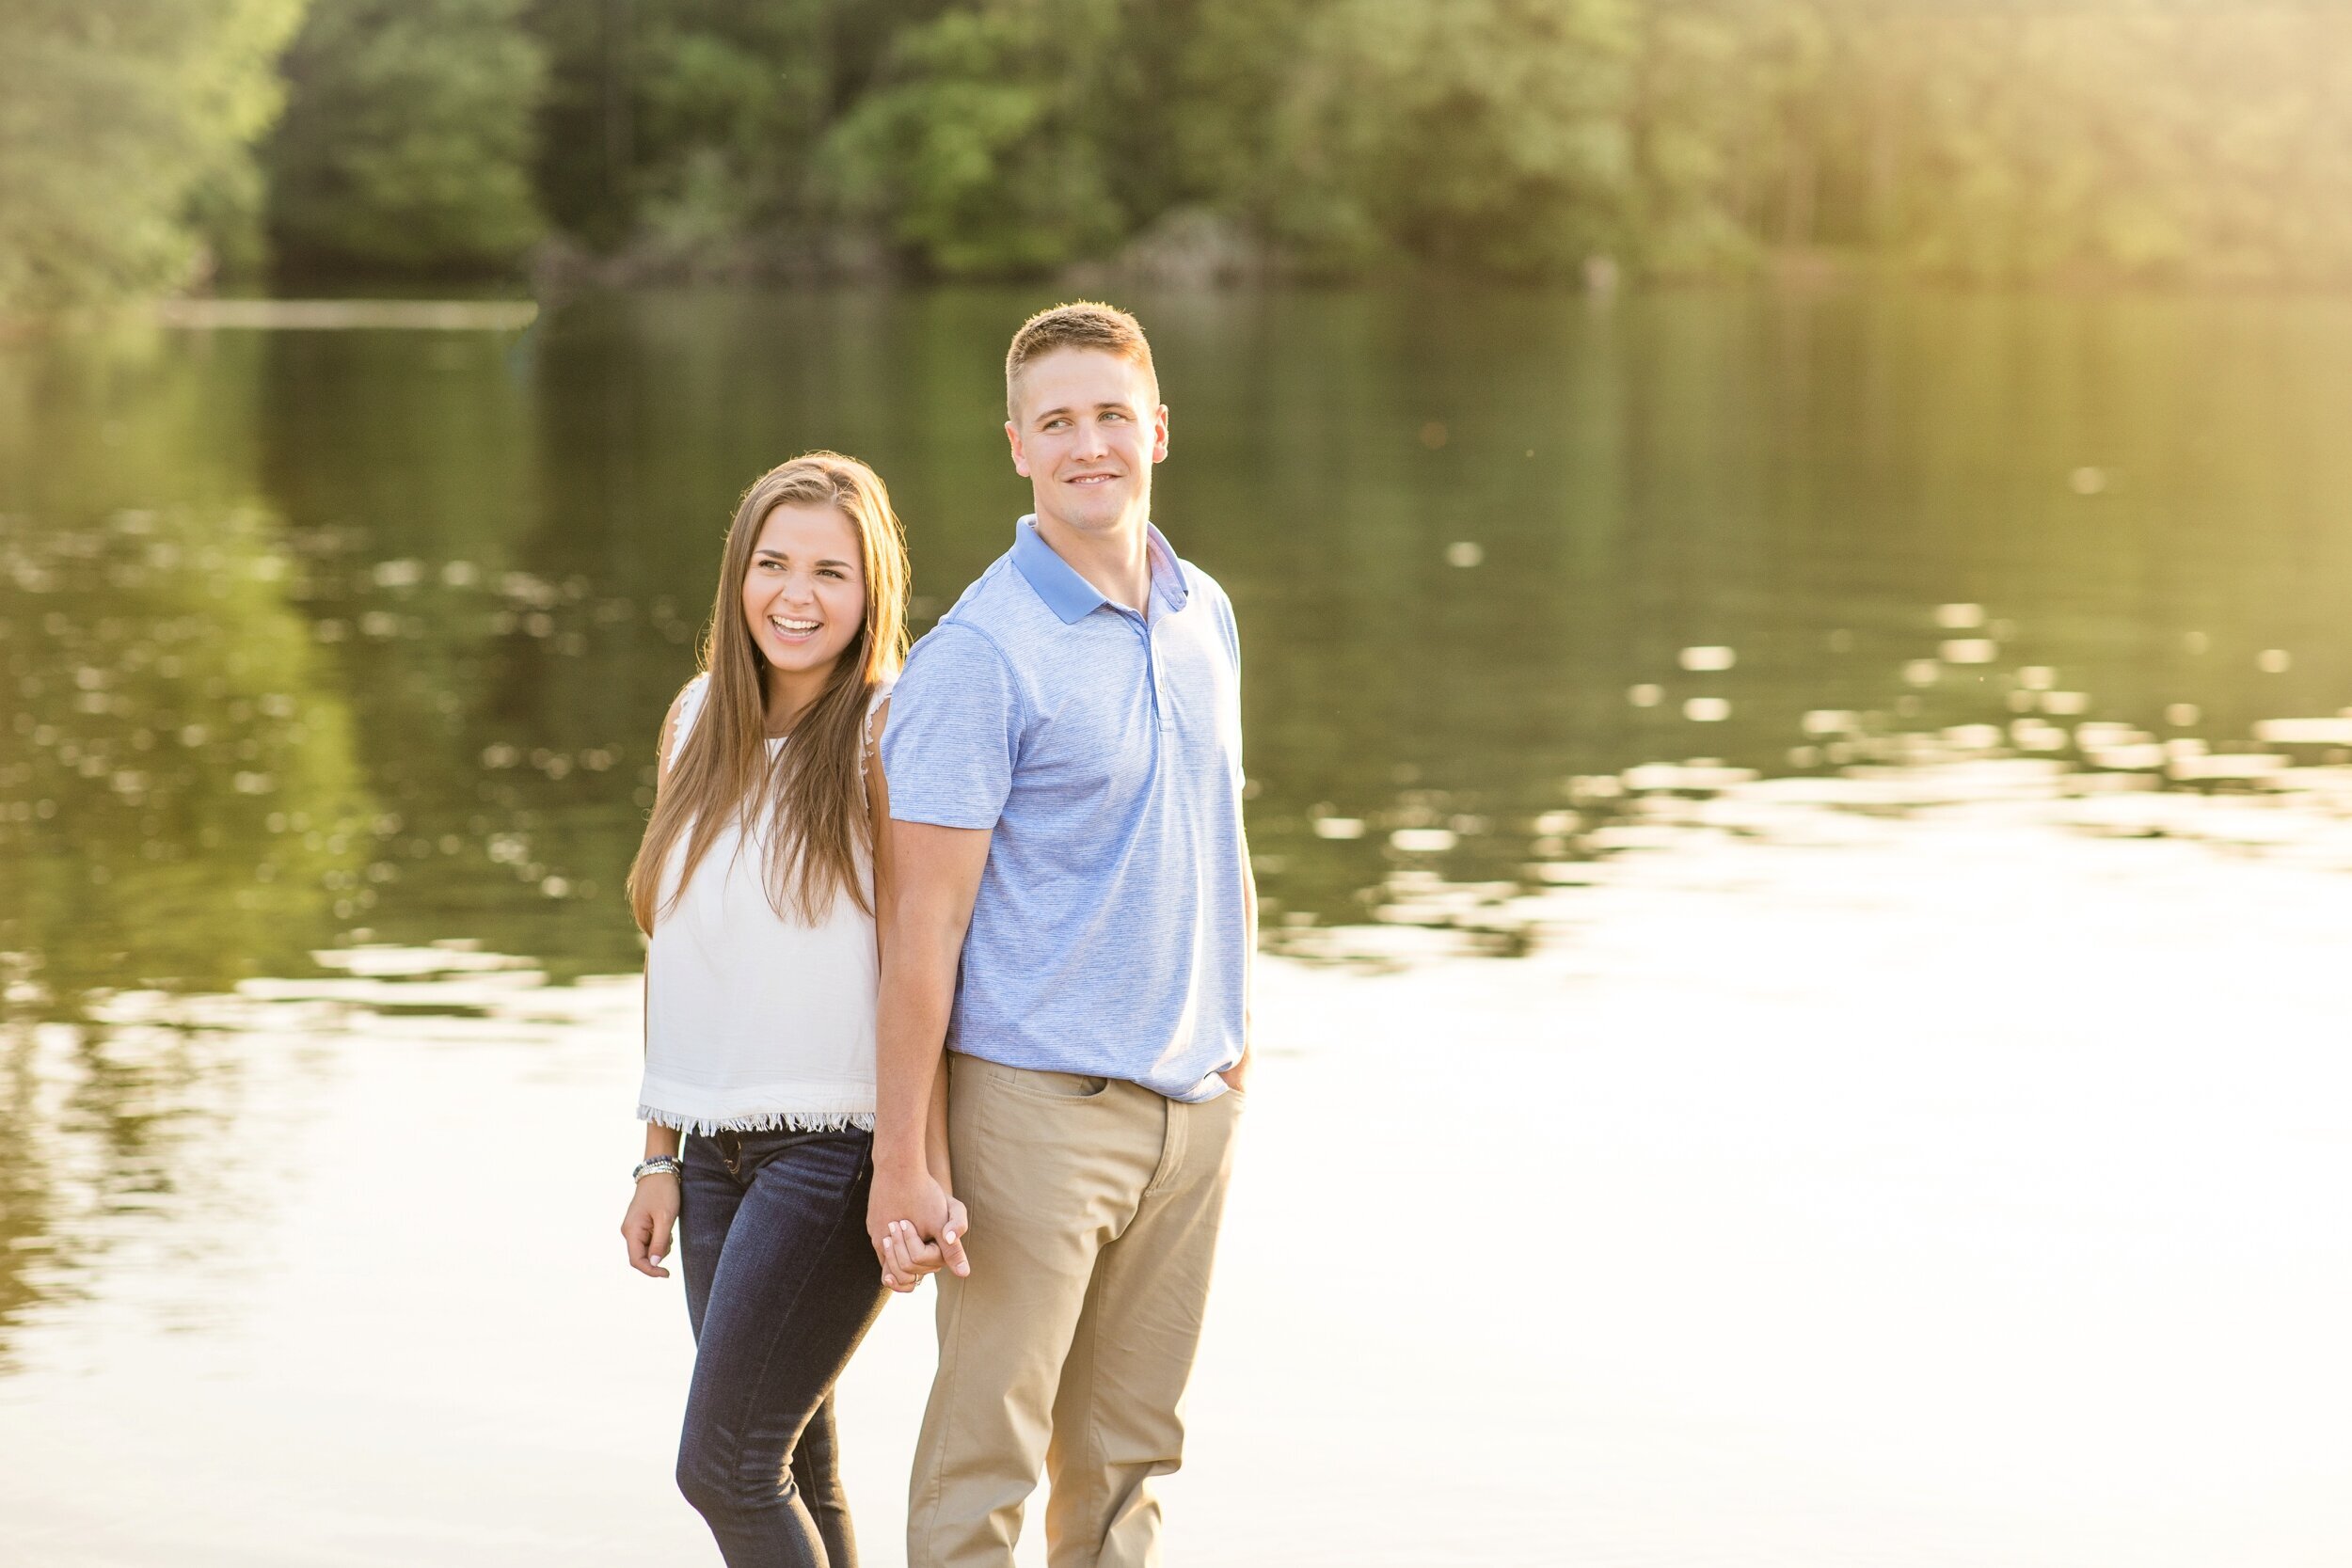 location ideas for photo sessions near cranberry township and zelienople, cranberry township photographer, zelienople photographer, north pittsburgh photographer, moraine state park photos